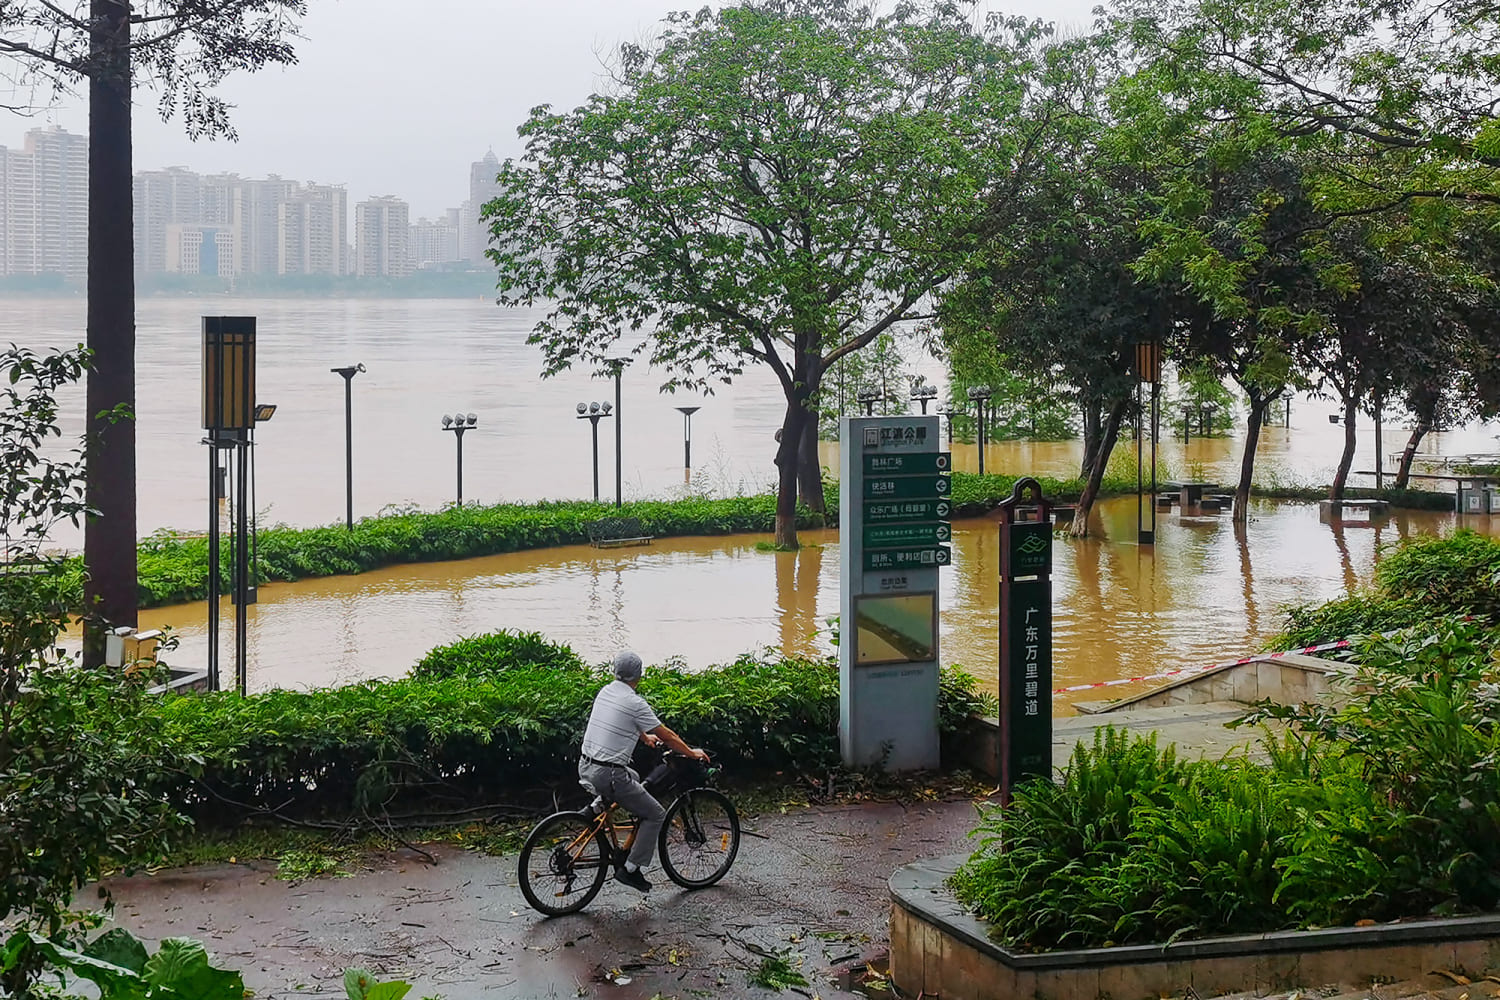 Massive river flooding expected in China’s Guangdong, threatening millions